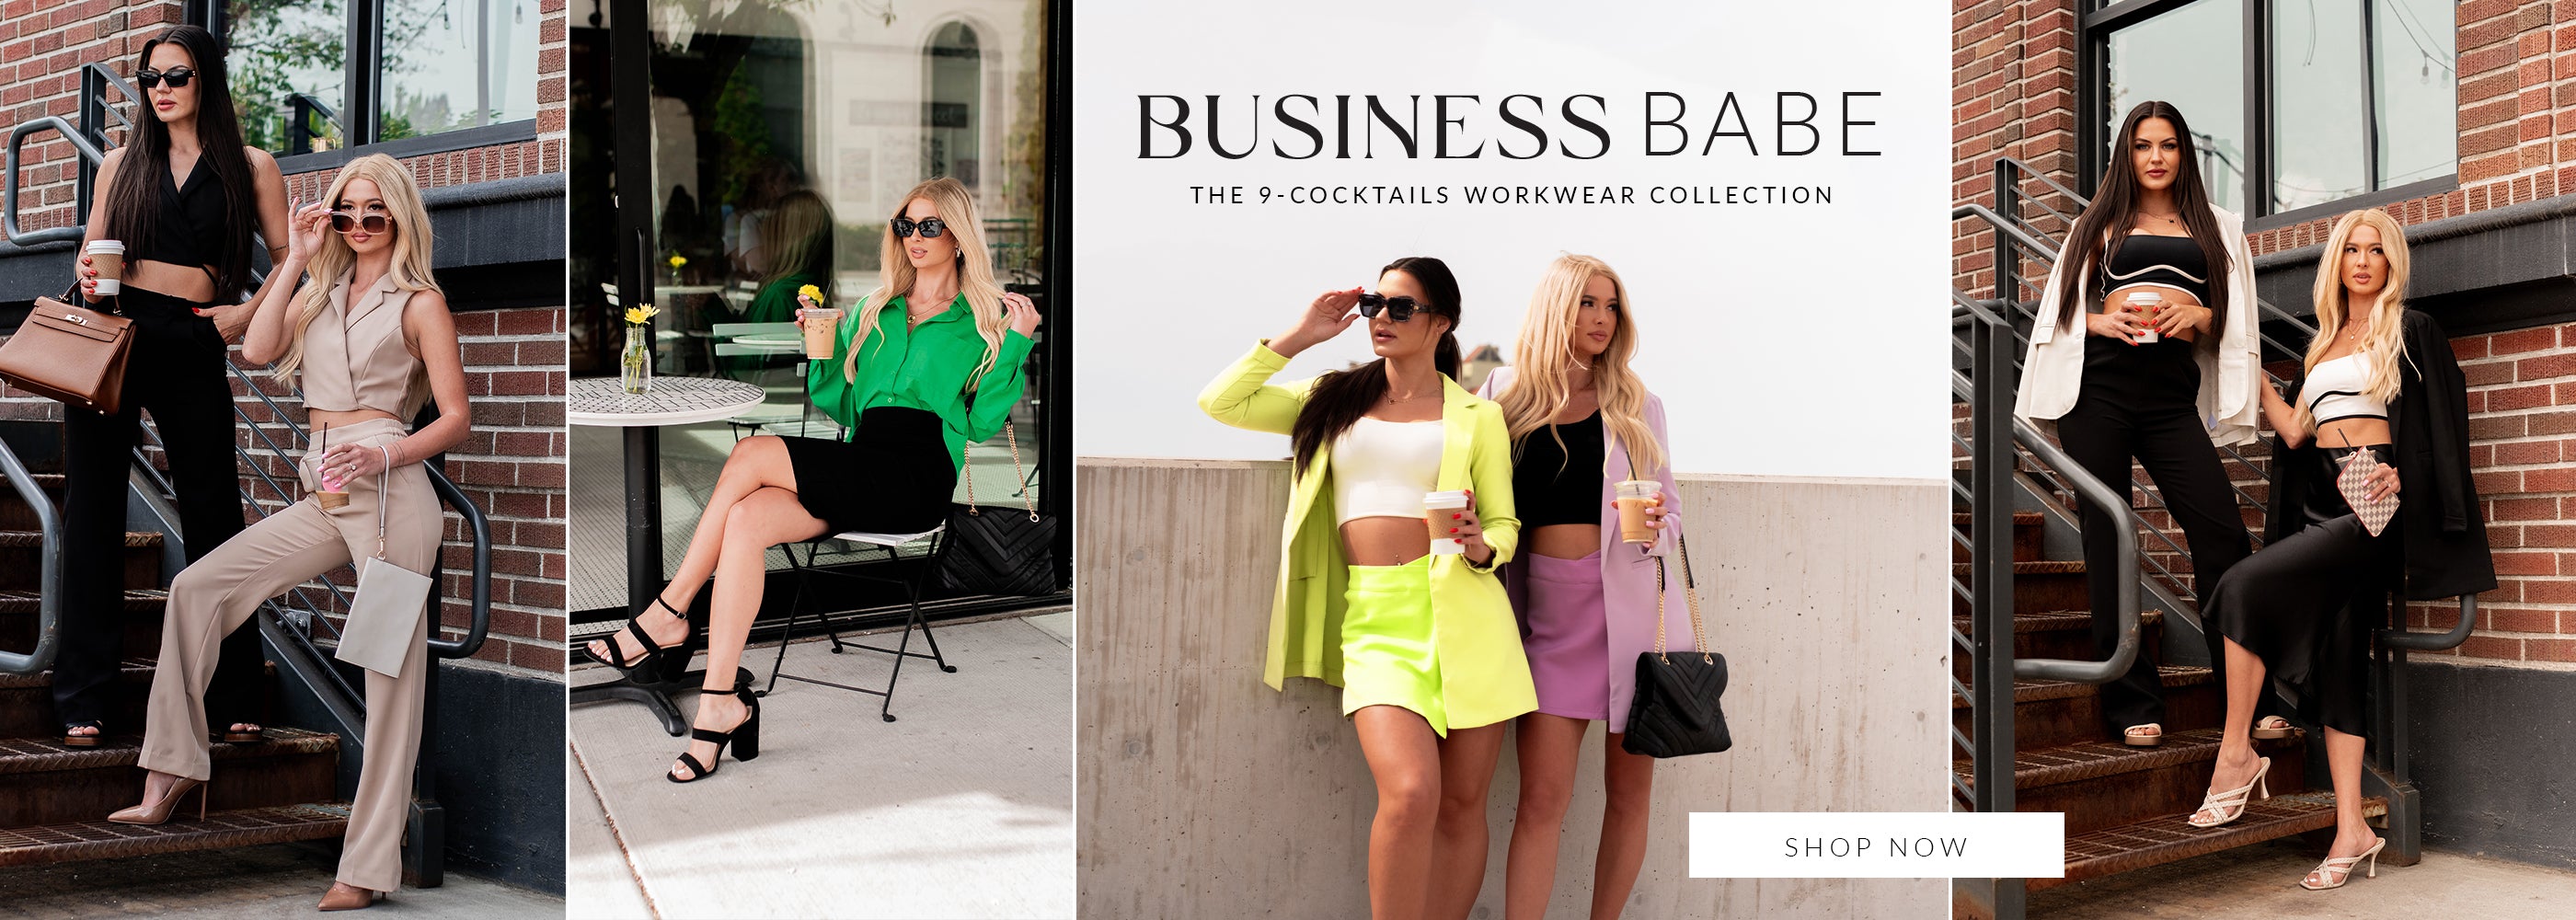 Collage of models wearing trendy business outfits. Headline says "Business Babe" The 9-Cocktails workwear collection. Call-to-action says "Shop Now" and links to the workwear collection.